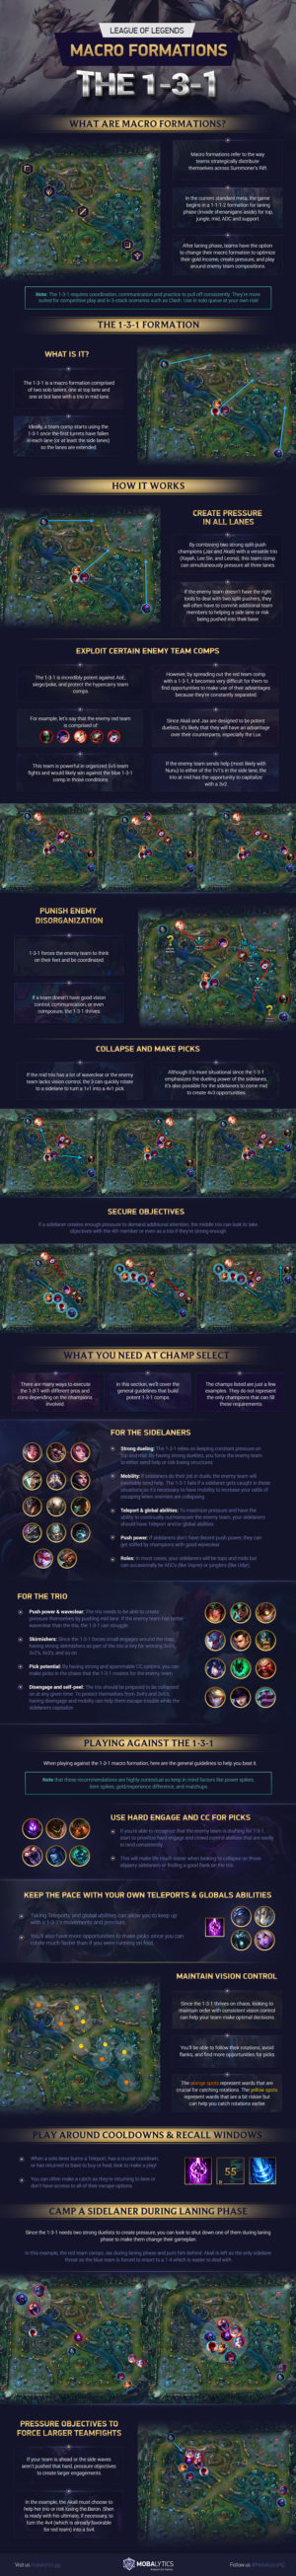 League of Legends Macro Formation: The 1-3-1 (Infographic)